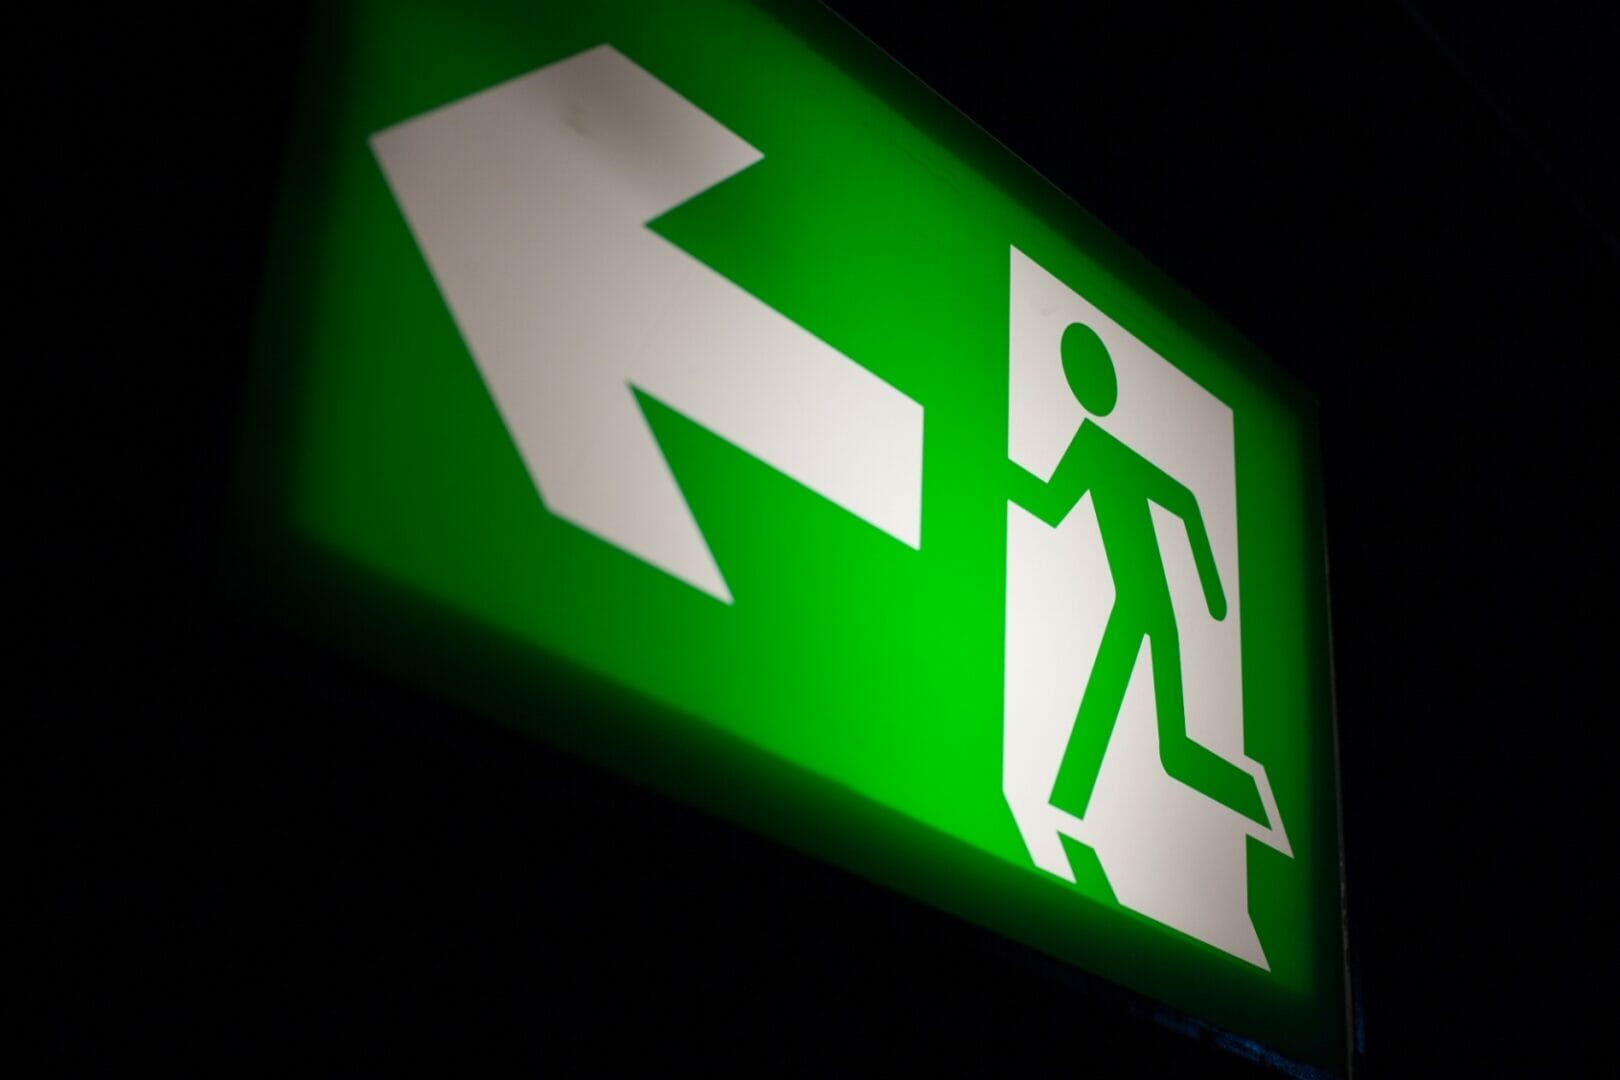 Why saving a few extra pounds on emergency lighting can be dangerous